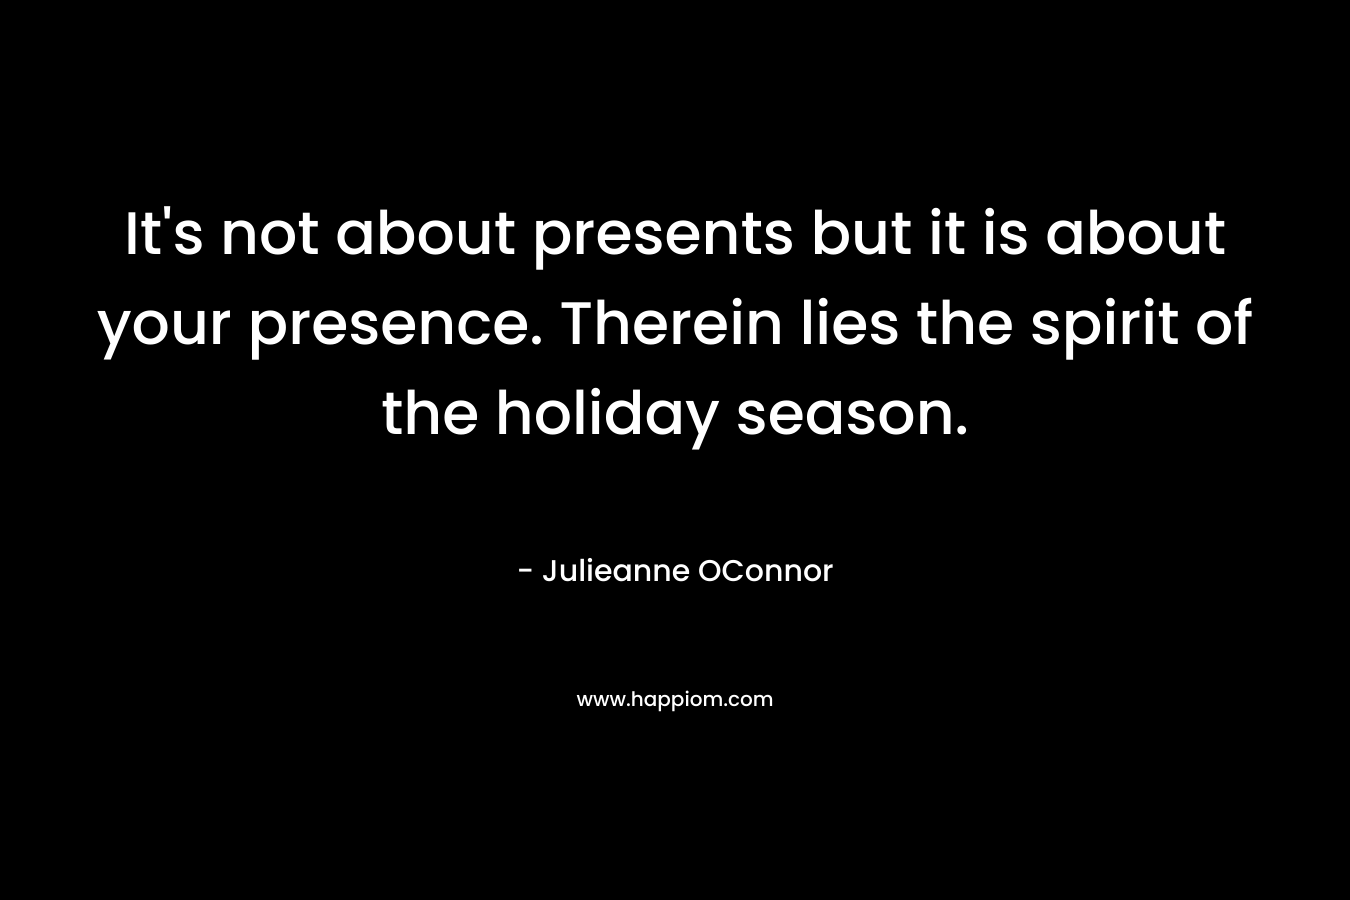 It's not about presents but it is about your presence. Therein lies the spirit of the holiday season.